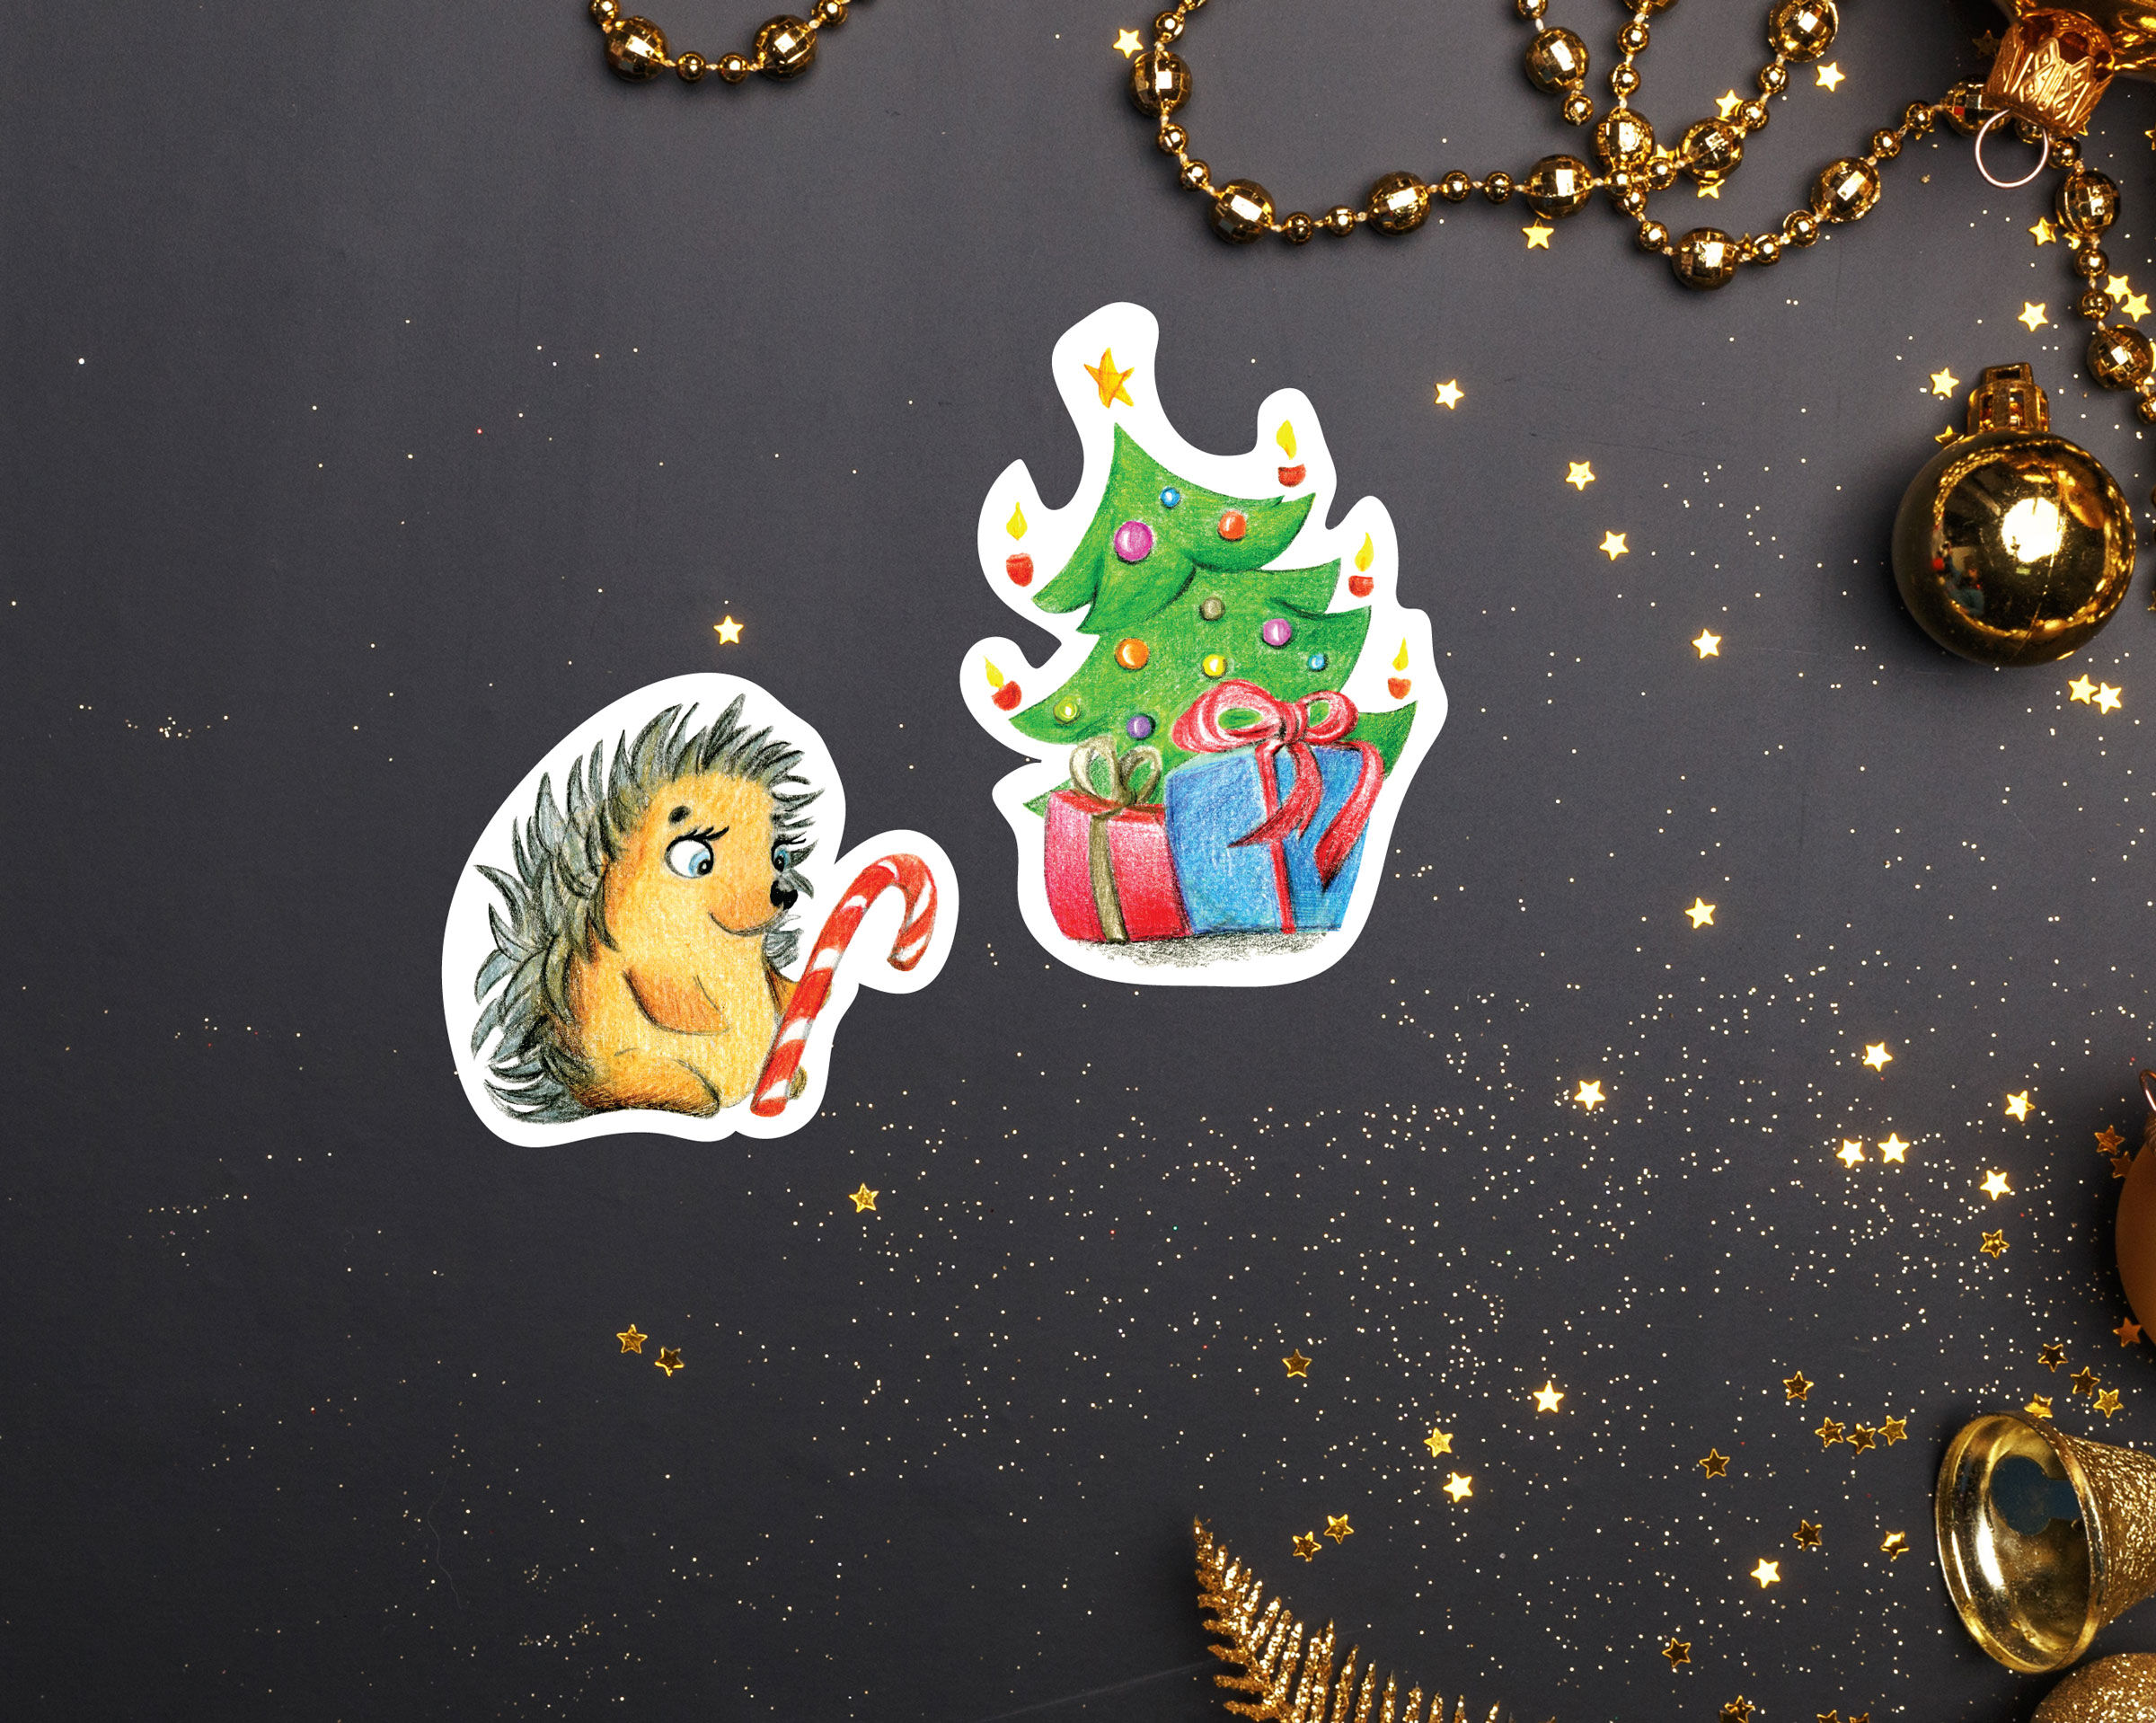 Funny Christmas sticker sheet, cute holiday stickers By JaneFoxikArt